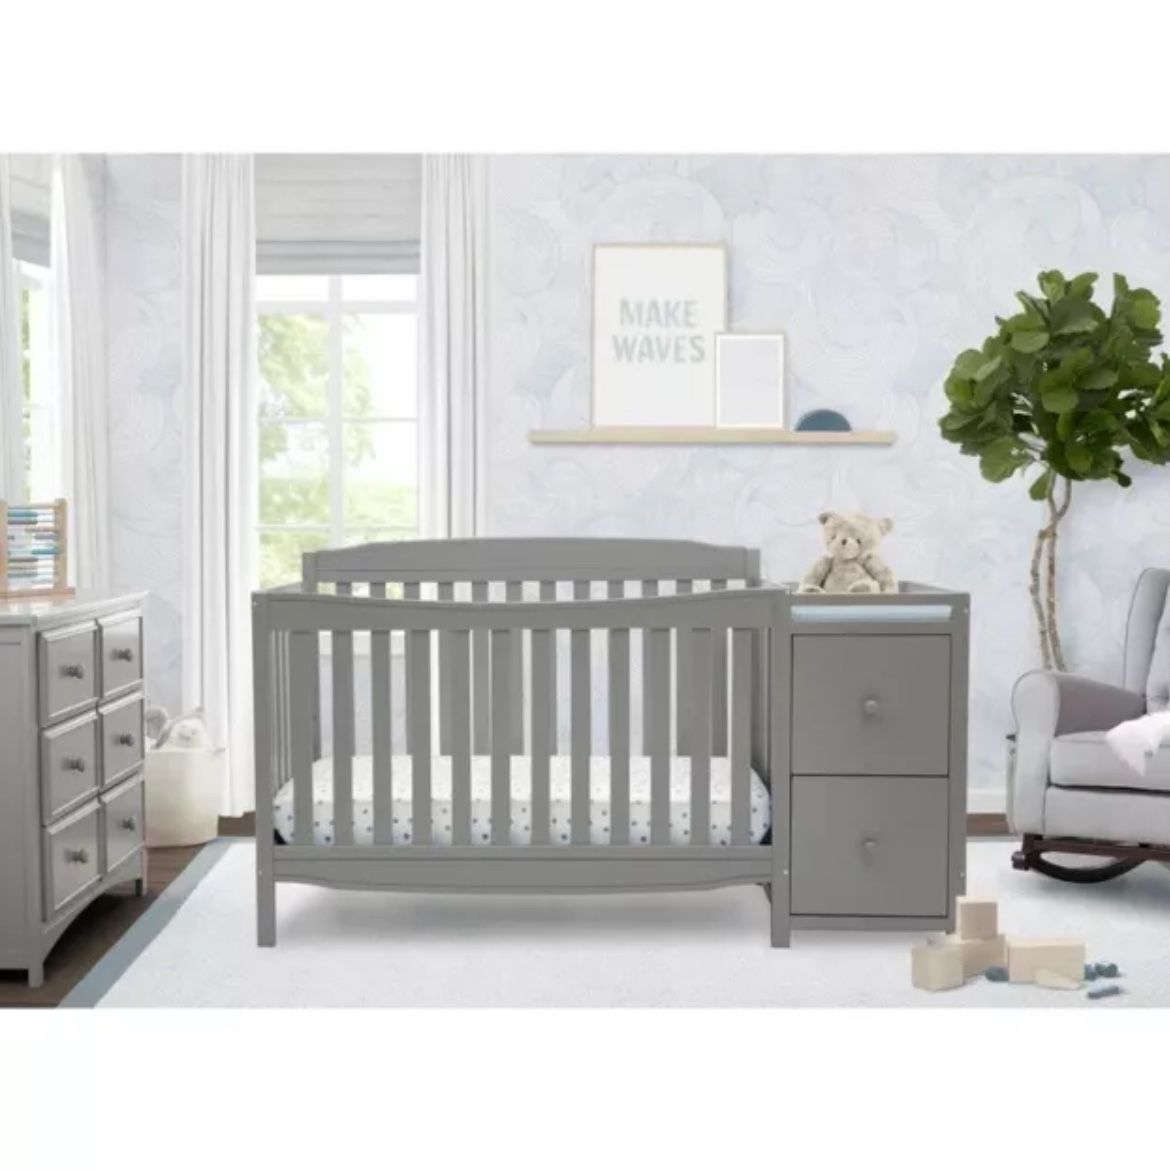 Baby Crib With Changing Station